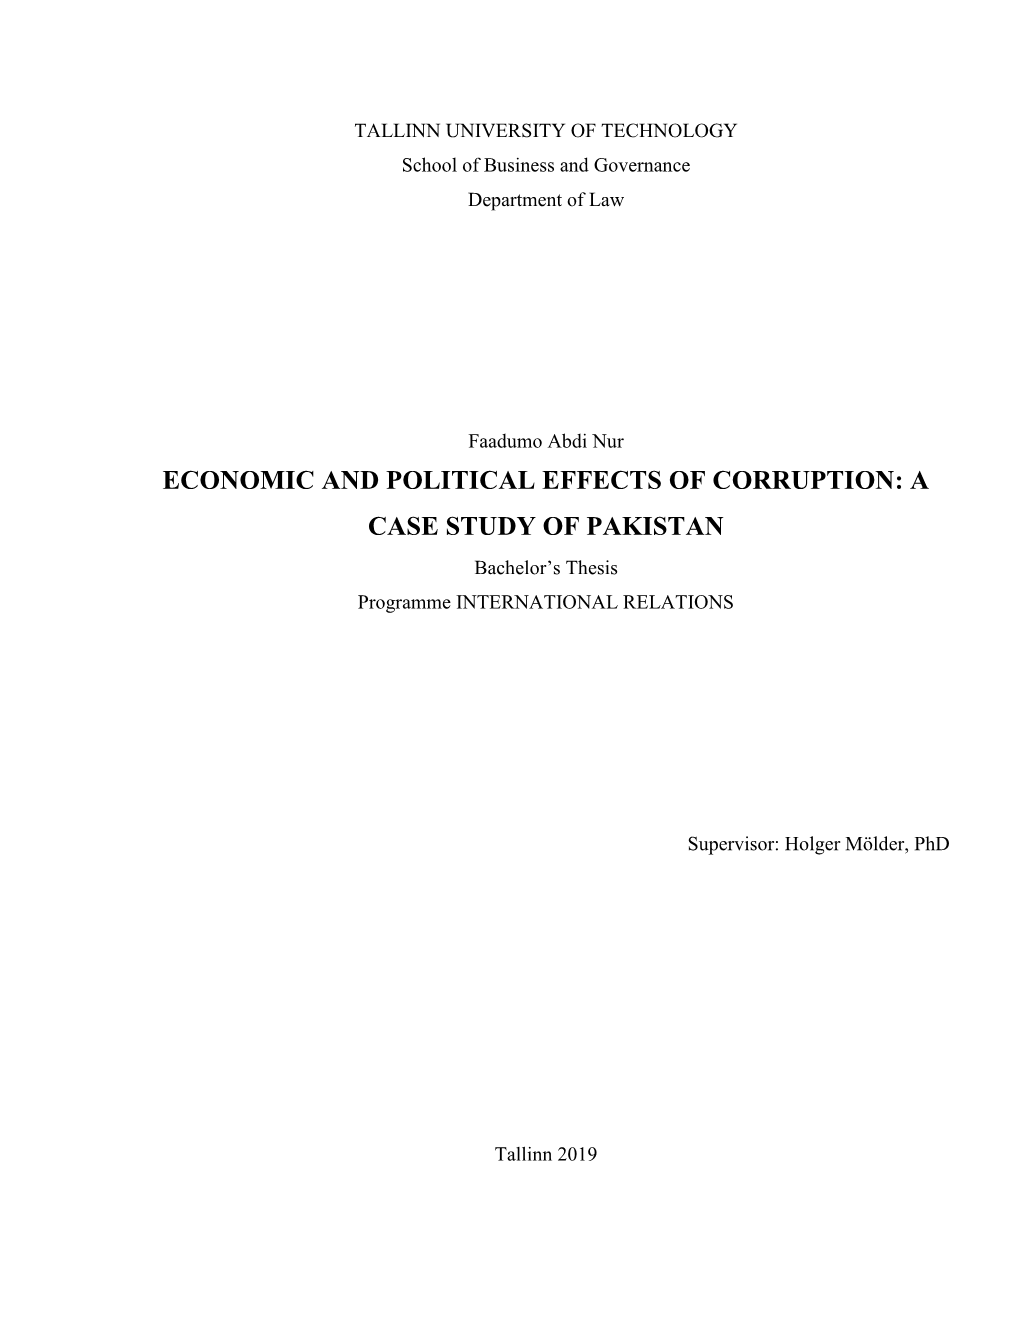 ECONOMIC and POLITICAL EFFECTS of CORRUPTION: a CASE STUDY of PAKISTAN Bachelor’S Thesis Programme INTERNATIONAL RELATIONS